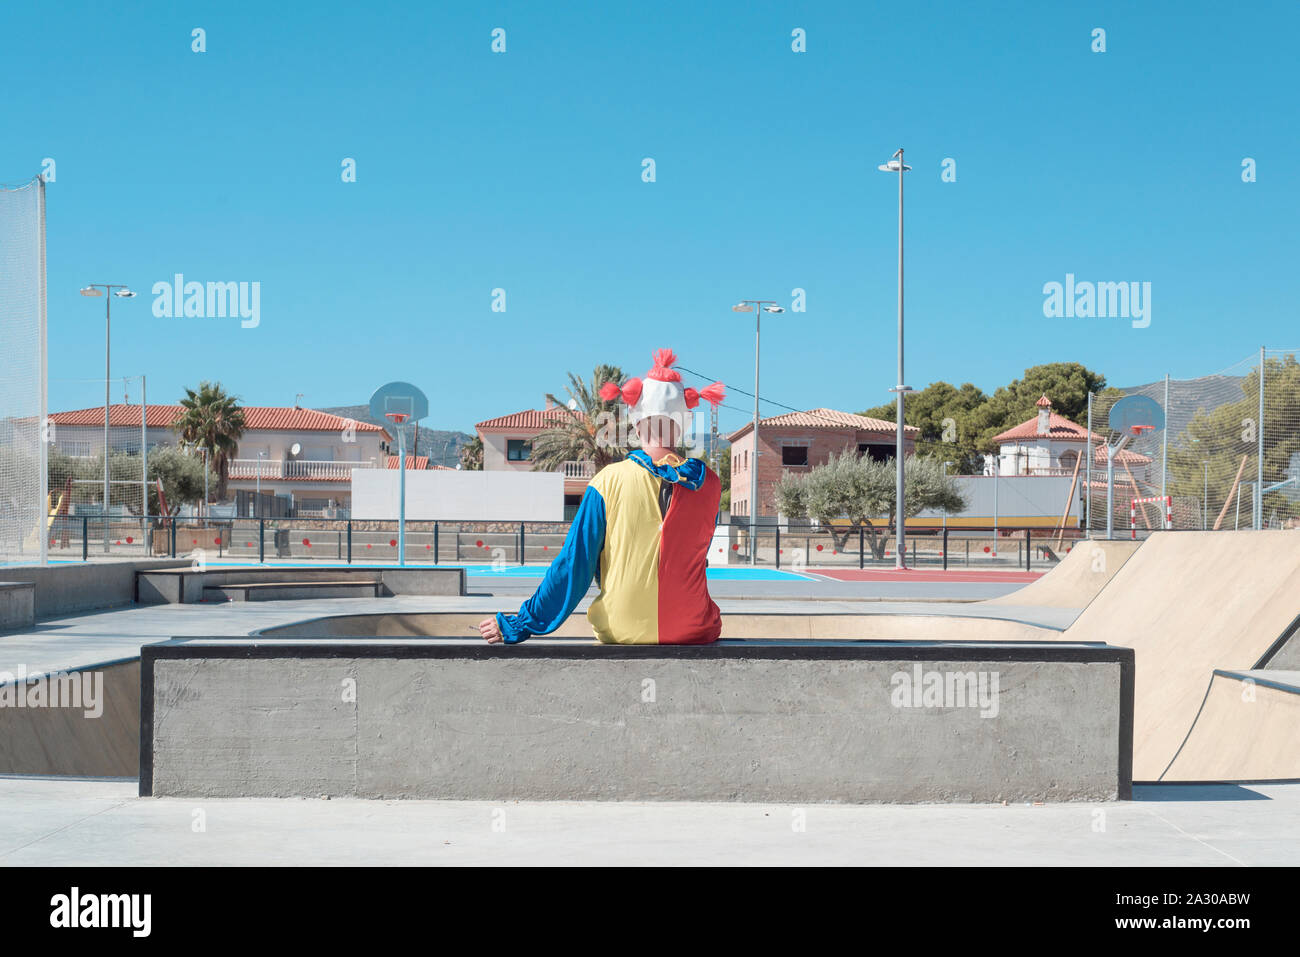 a scary clown, wearing a colorful yellow, red and blue costume, seen from behind, smoking a cigarette, sitting in an outdoor public sports complex Stock Photo